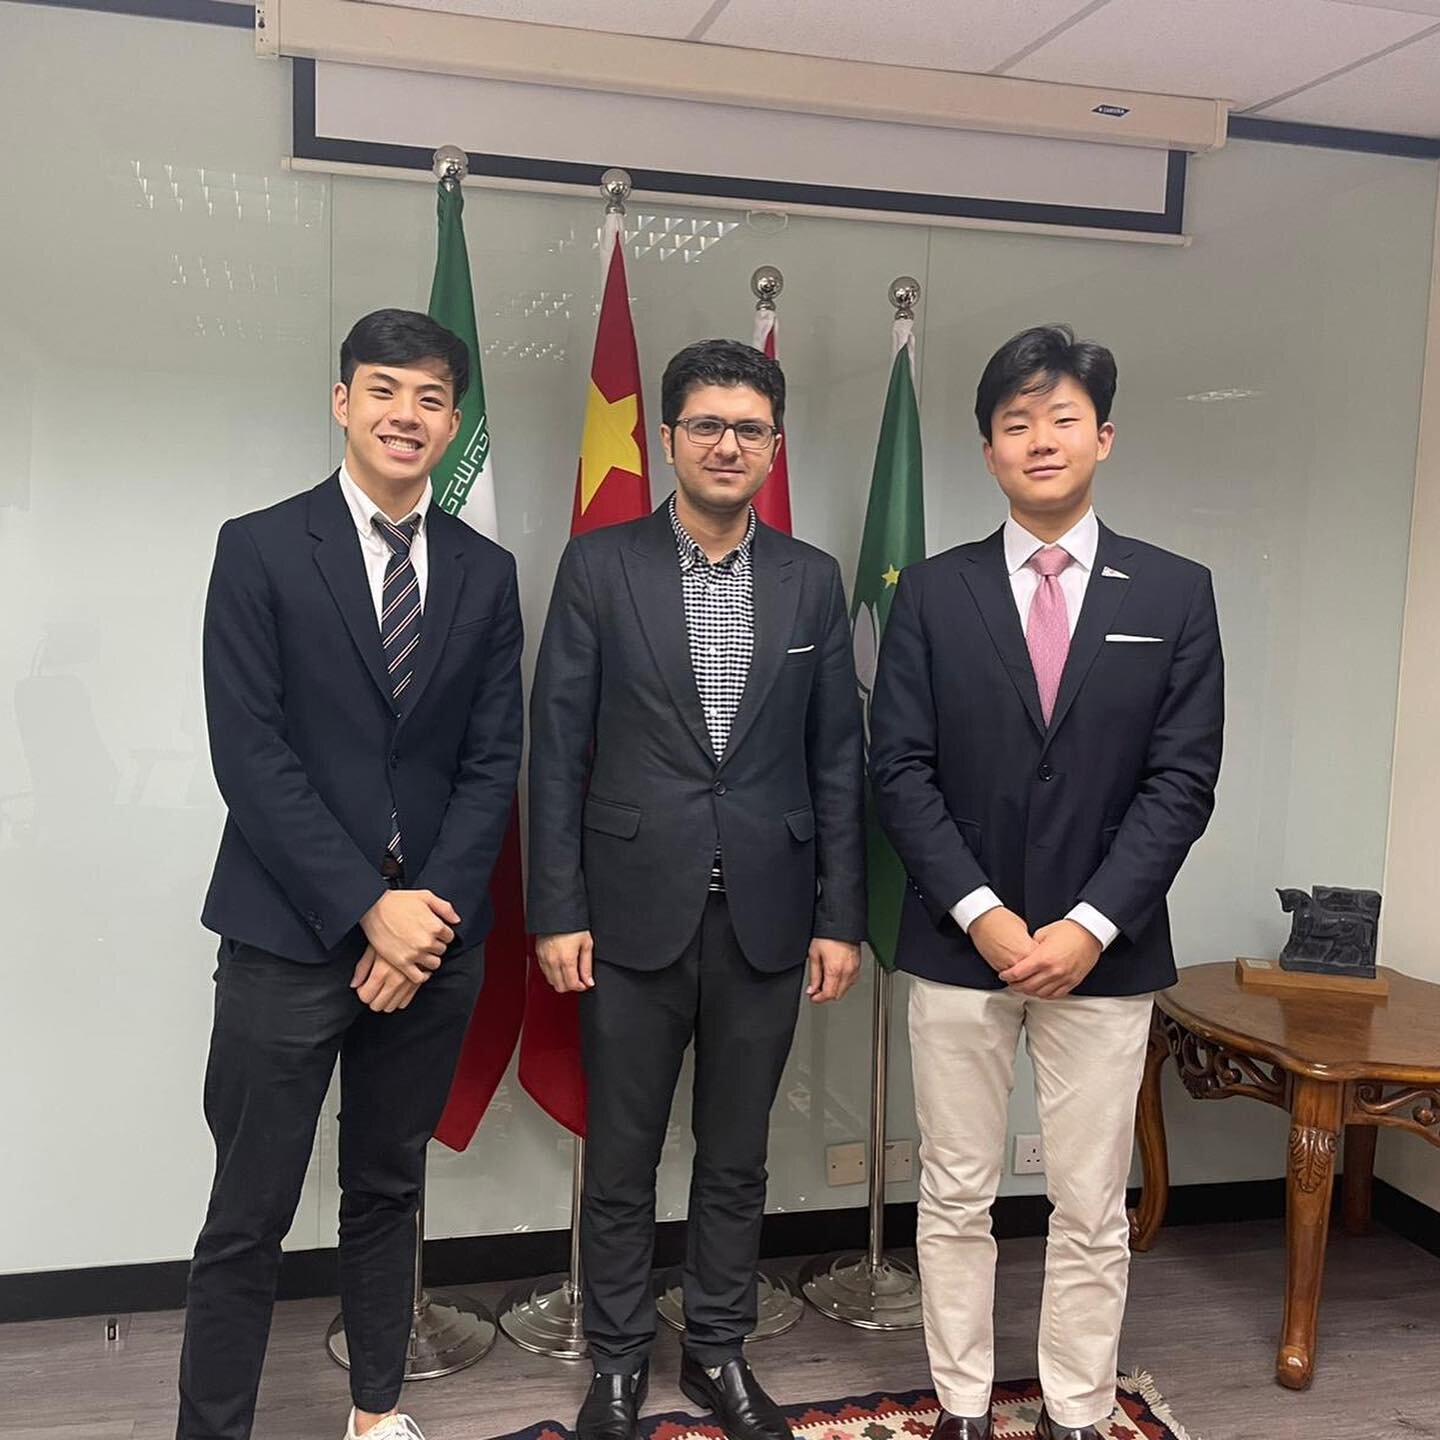 Consulate General of the Islamic Republic of Iran 🇮🇷
Location: Unit 701, 7 floor - The Suns Group Centre - 200 Gloucester Road - Causeway Bay

Today we had the honor of meeting the Political and Economic Consul General of Iran Reza Esmkhani at the 